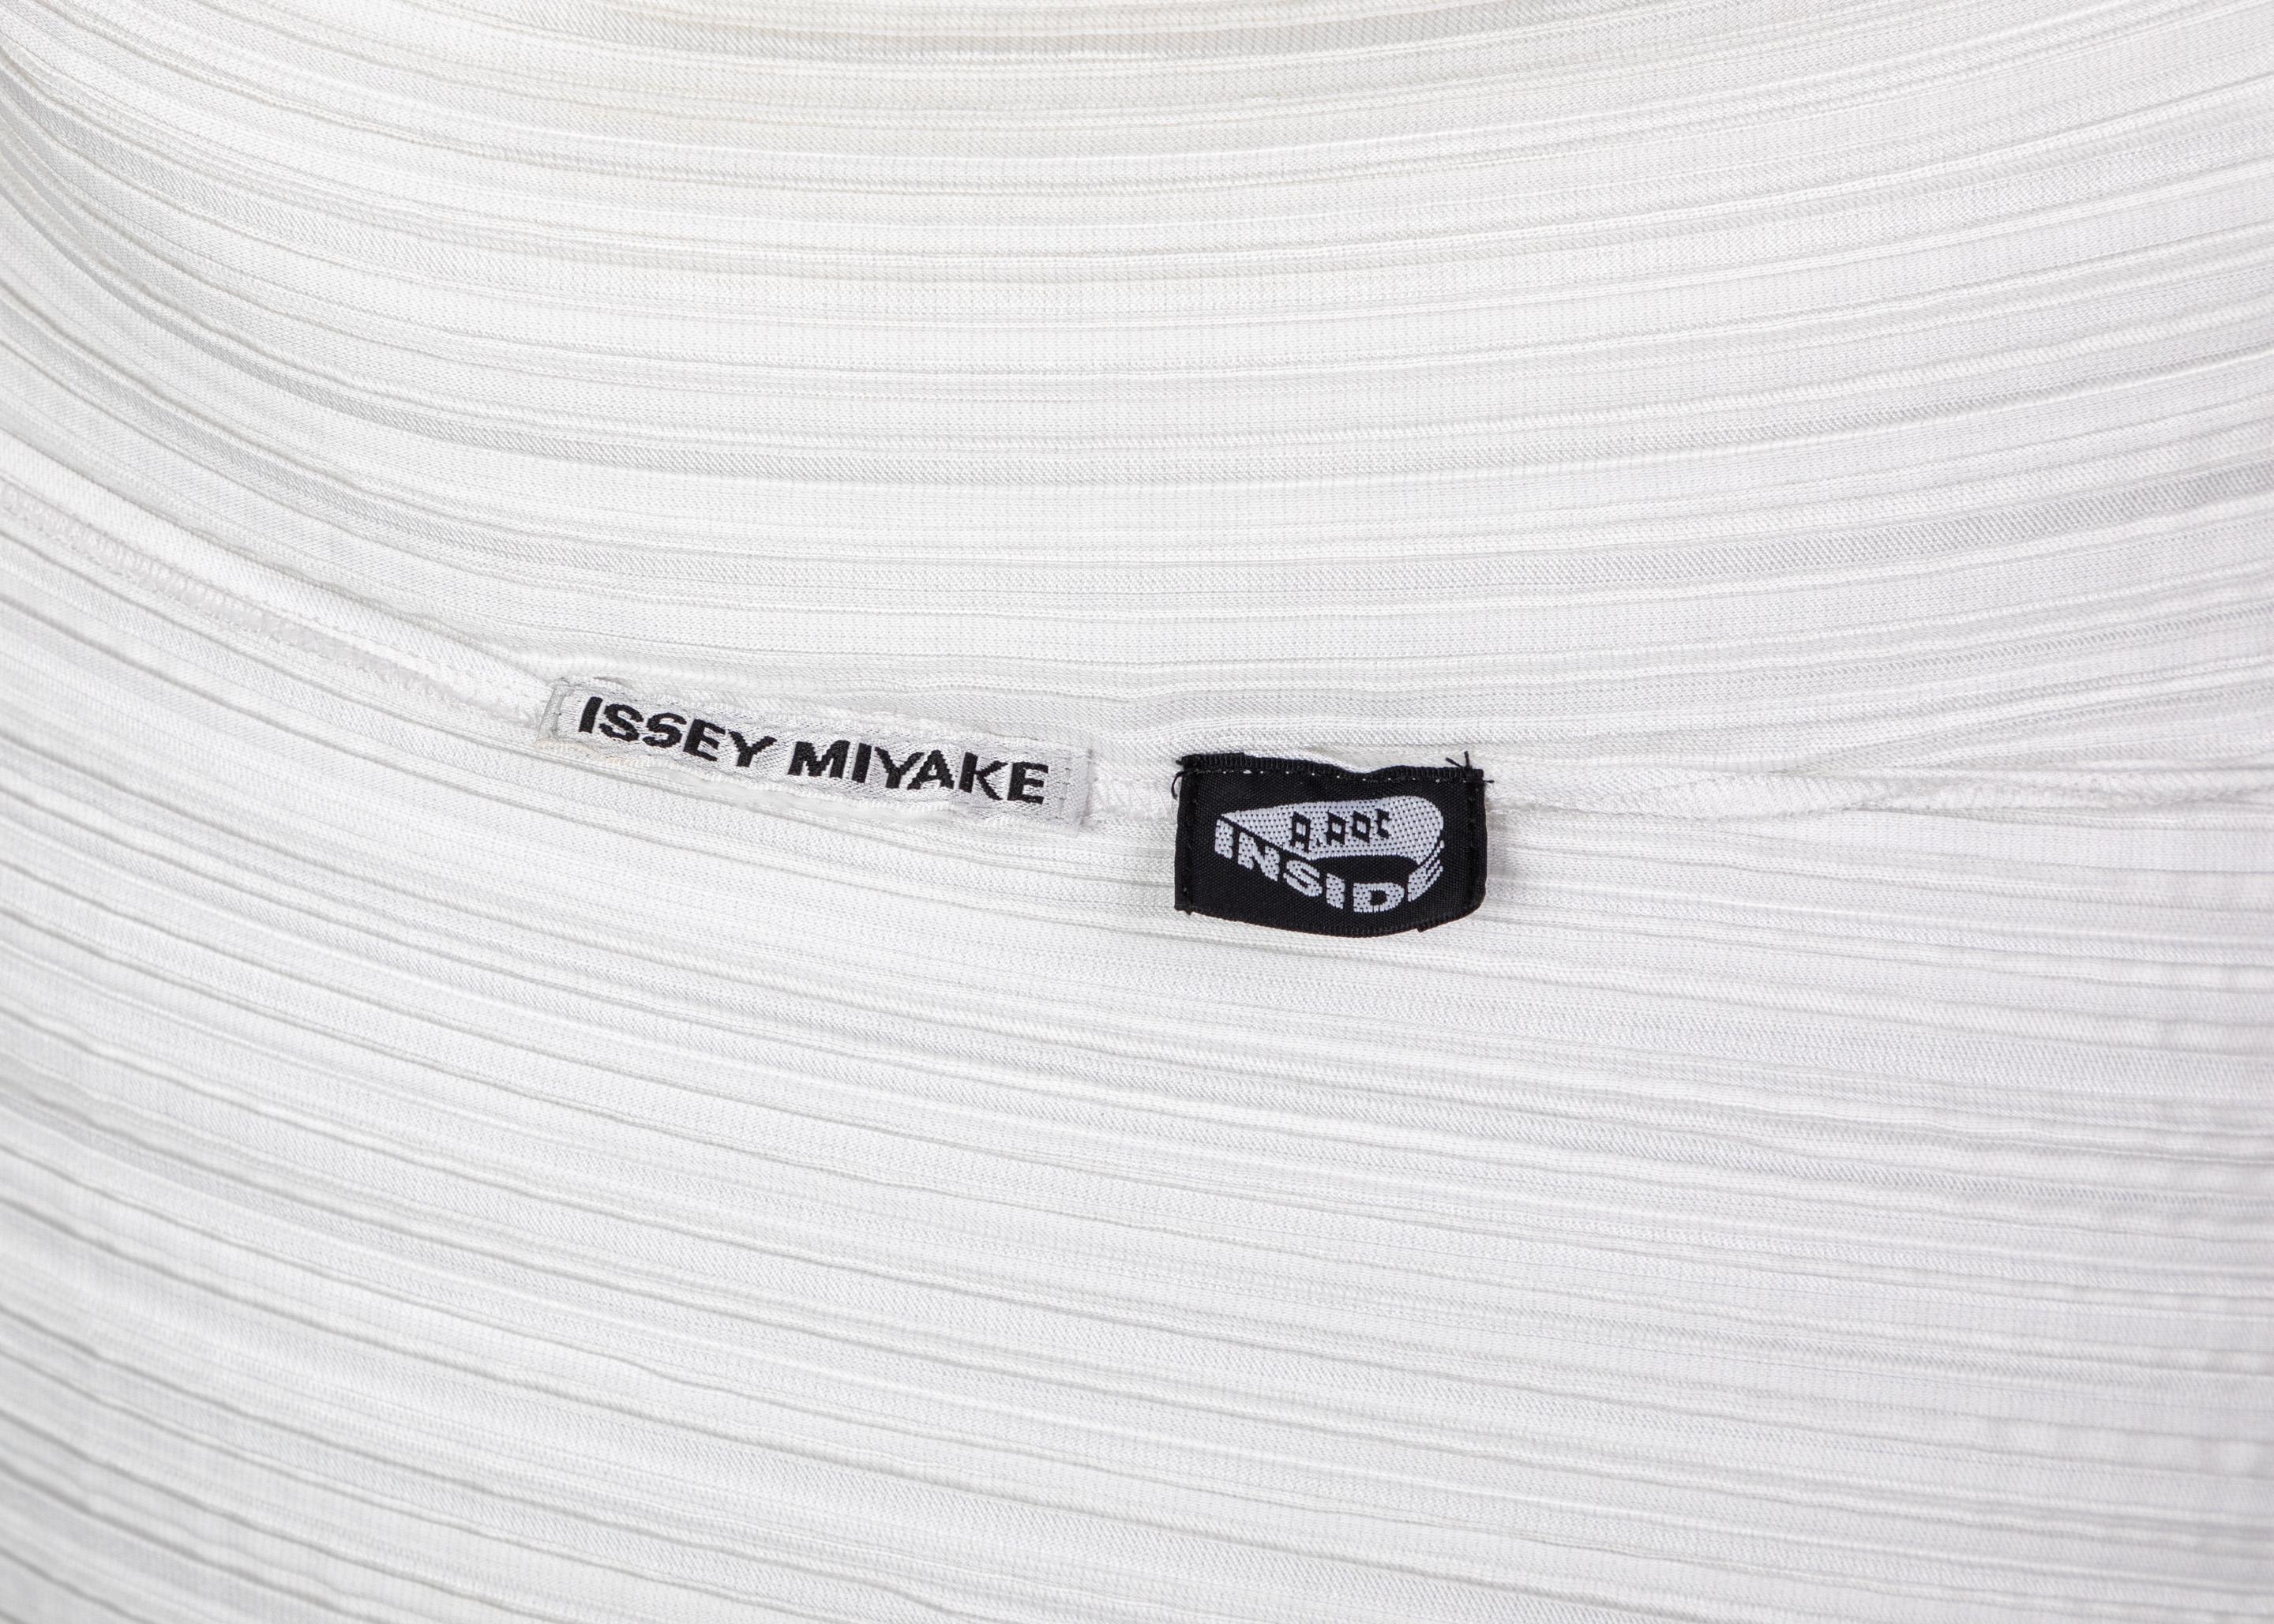 Issey Miyake “A Piece of Cloth” 2-Way White Gray Sleeveless Sculptural Dress For Sale 6